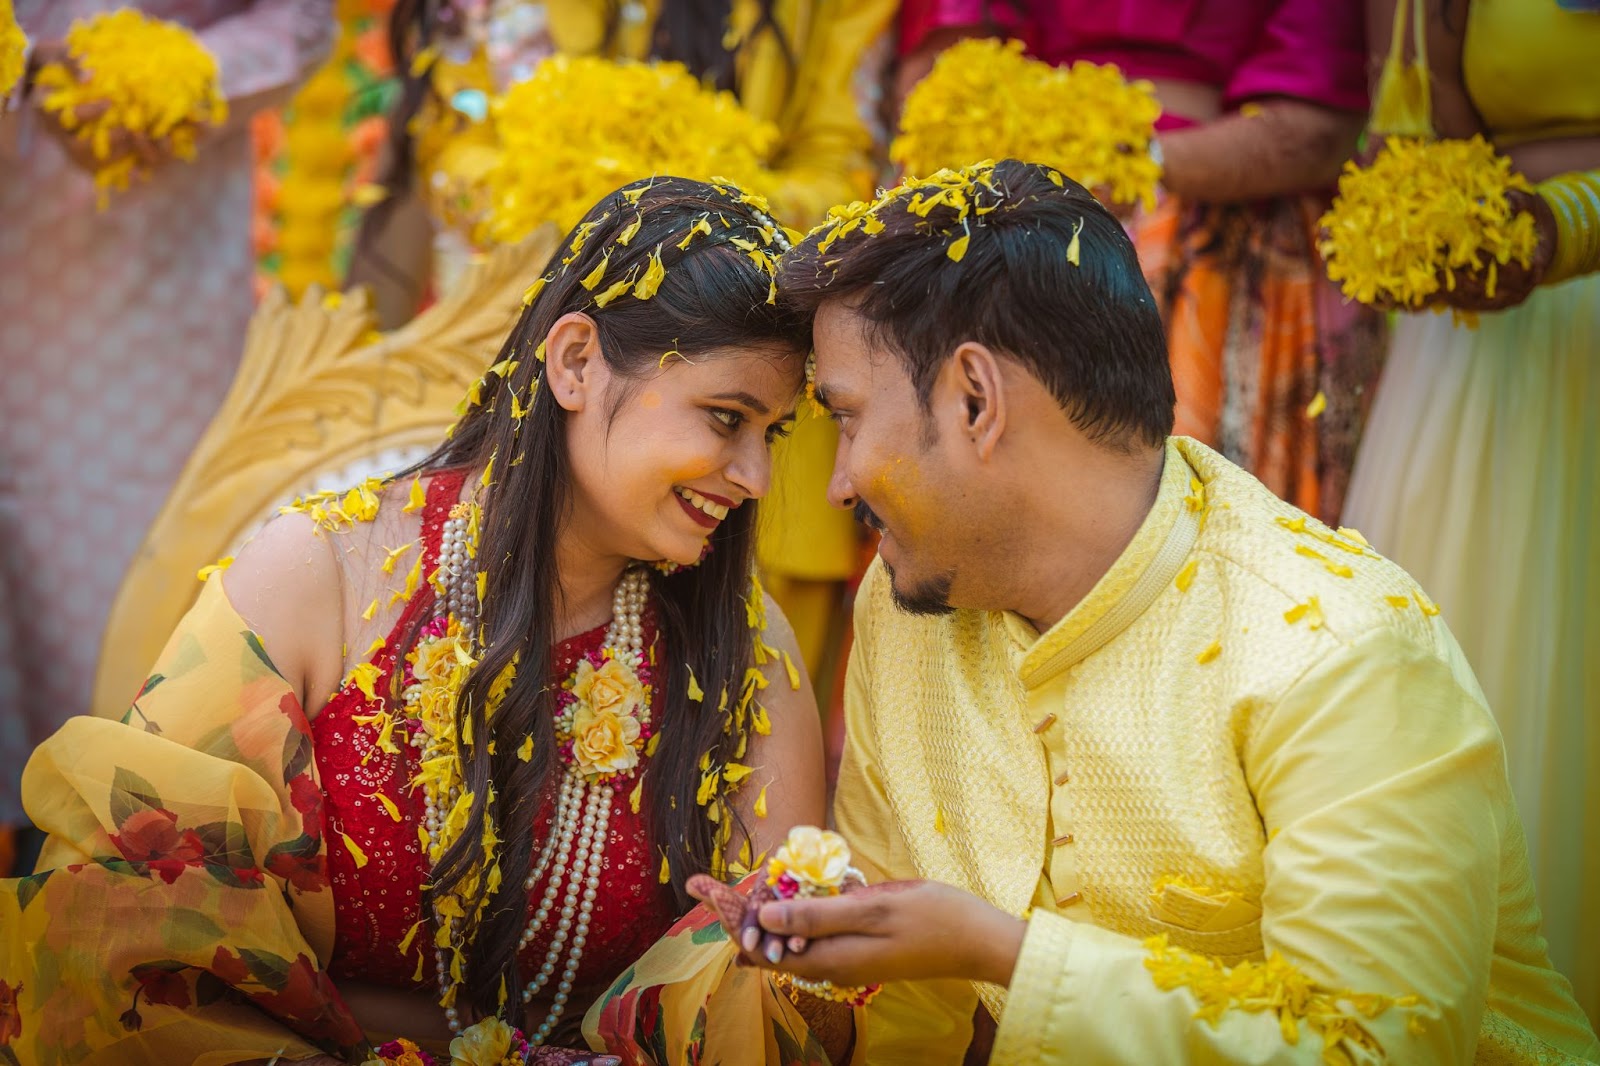 Wedding photographer in Indore for timeless wedding photos - Harsh Studio Photography 